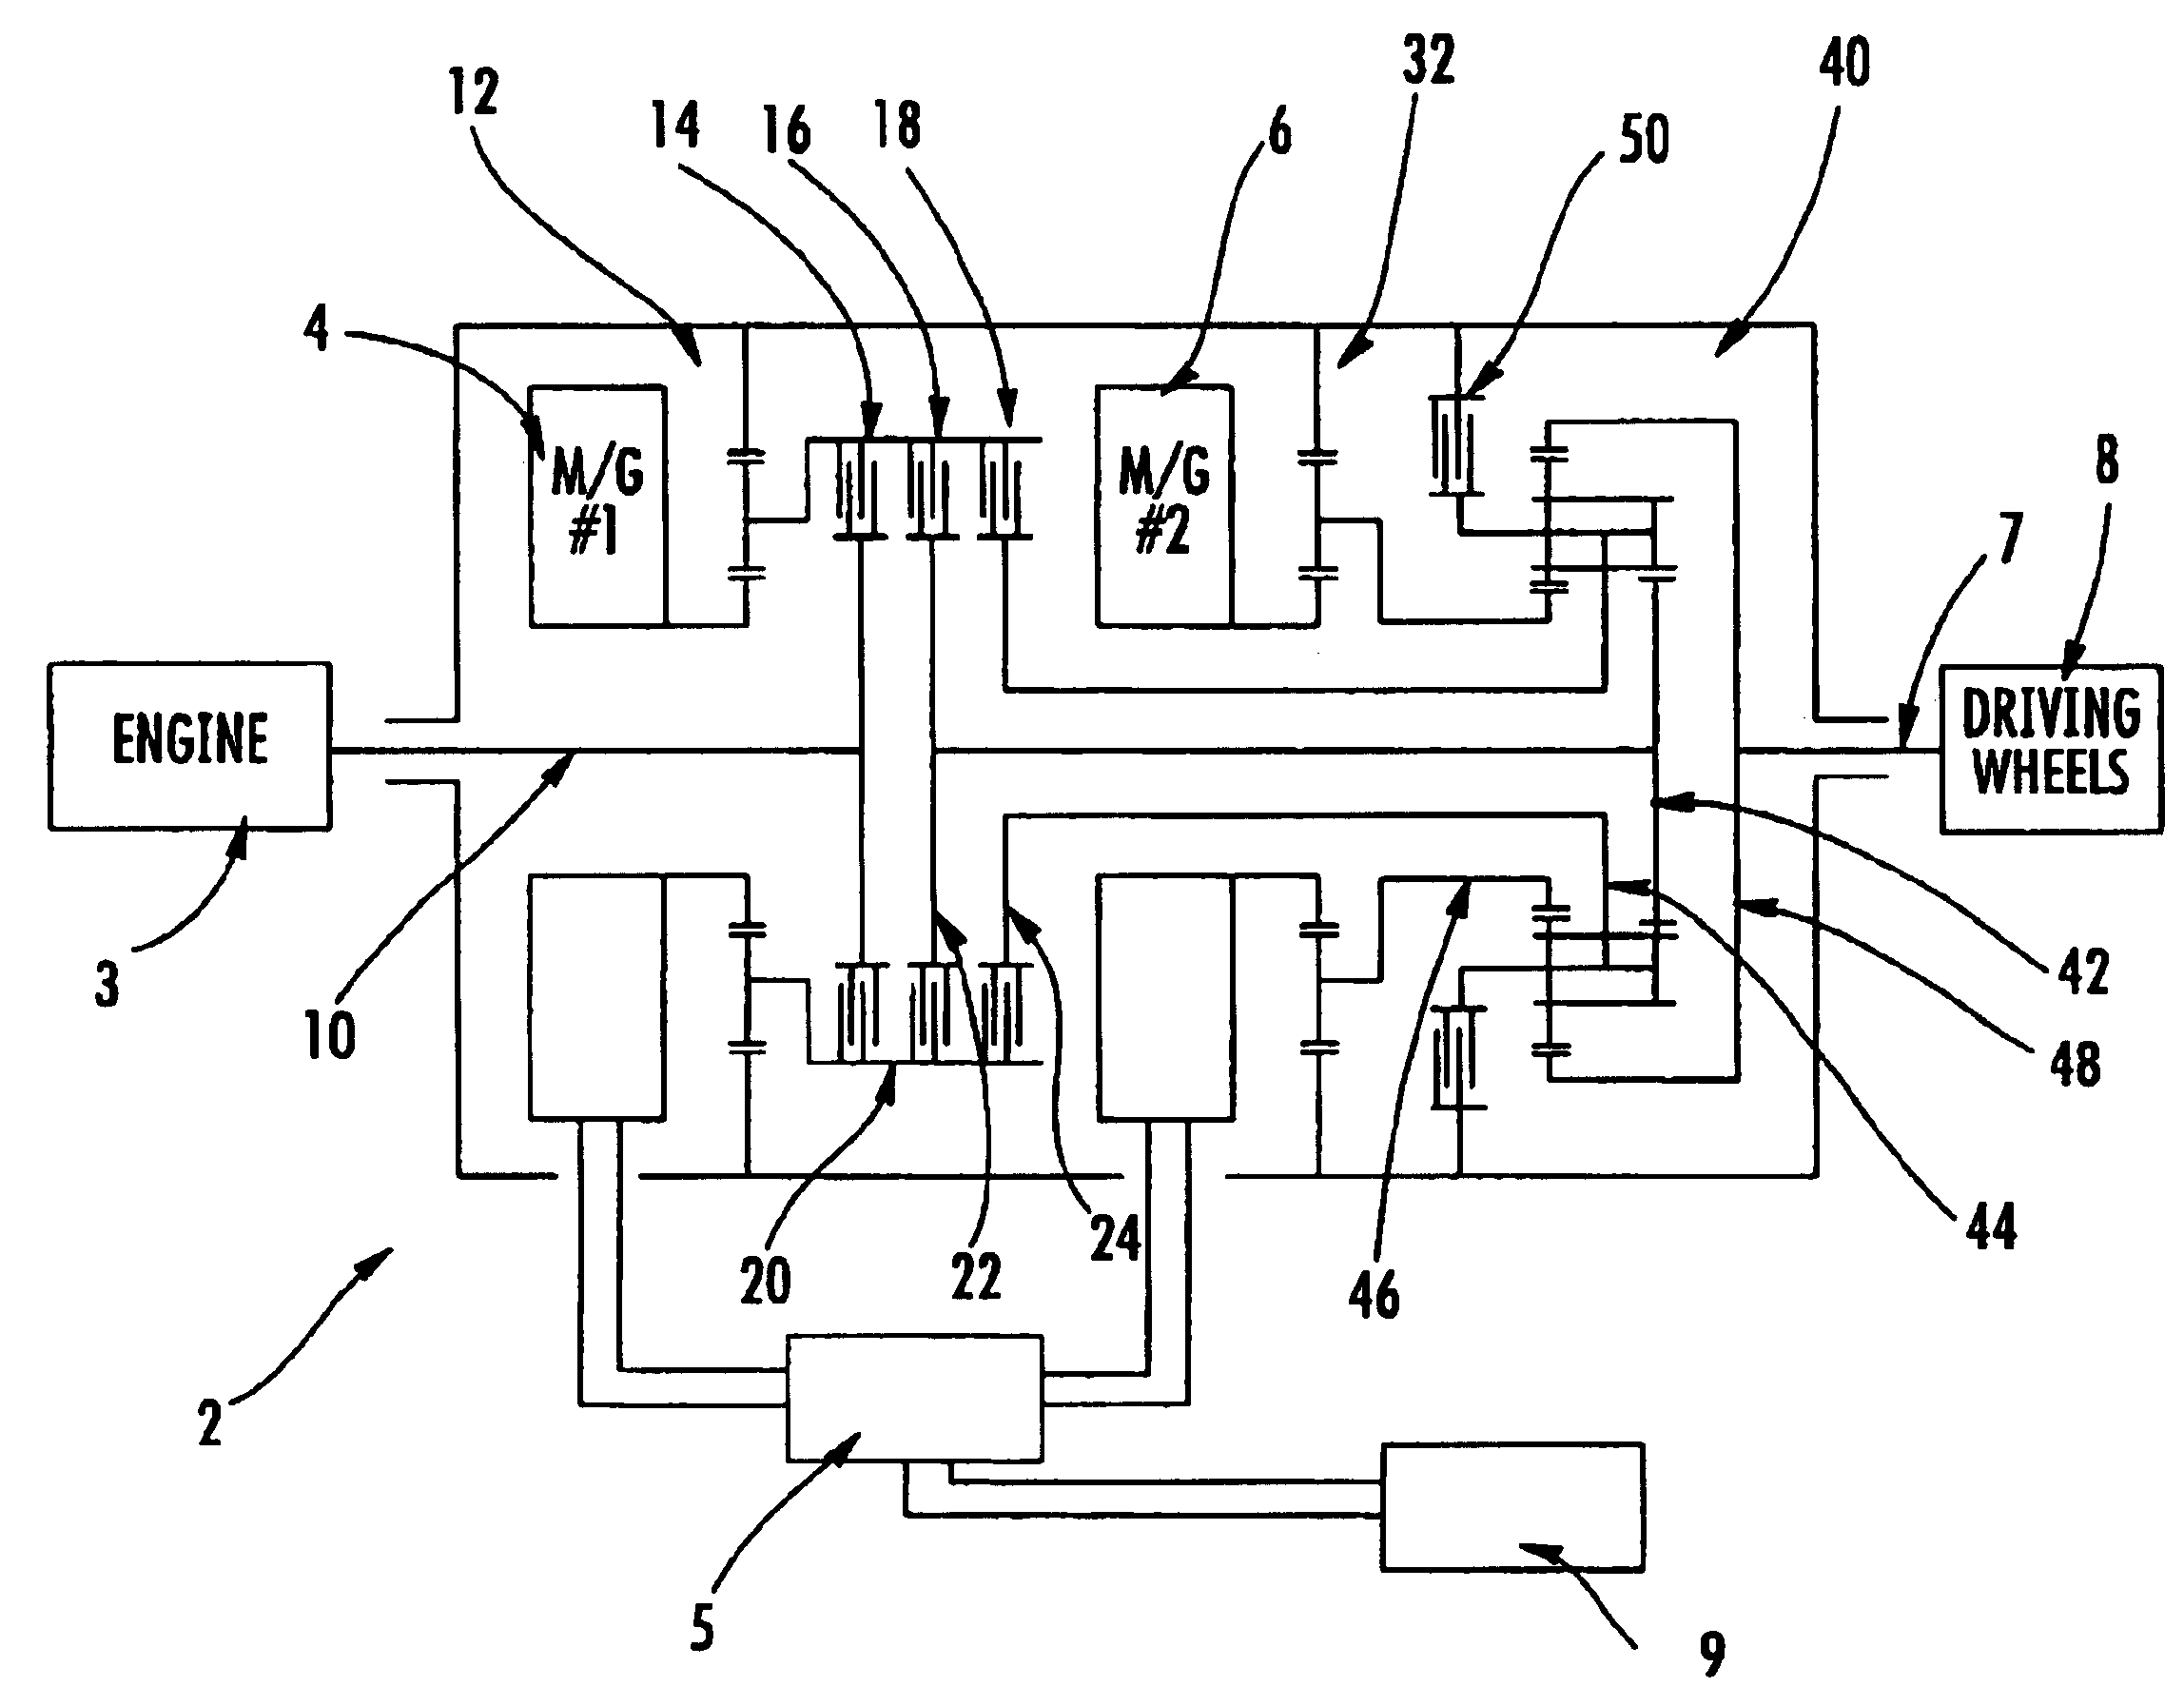 Multi-range parallel-hybrid continuously variable transmission